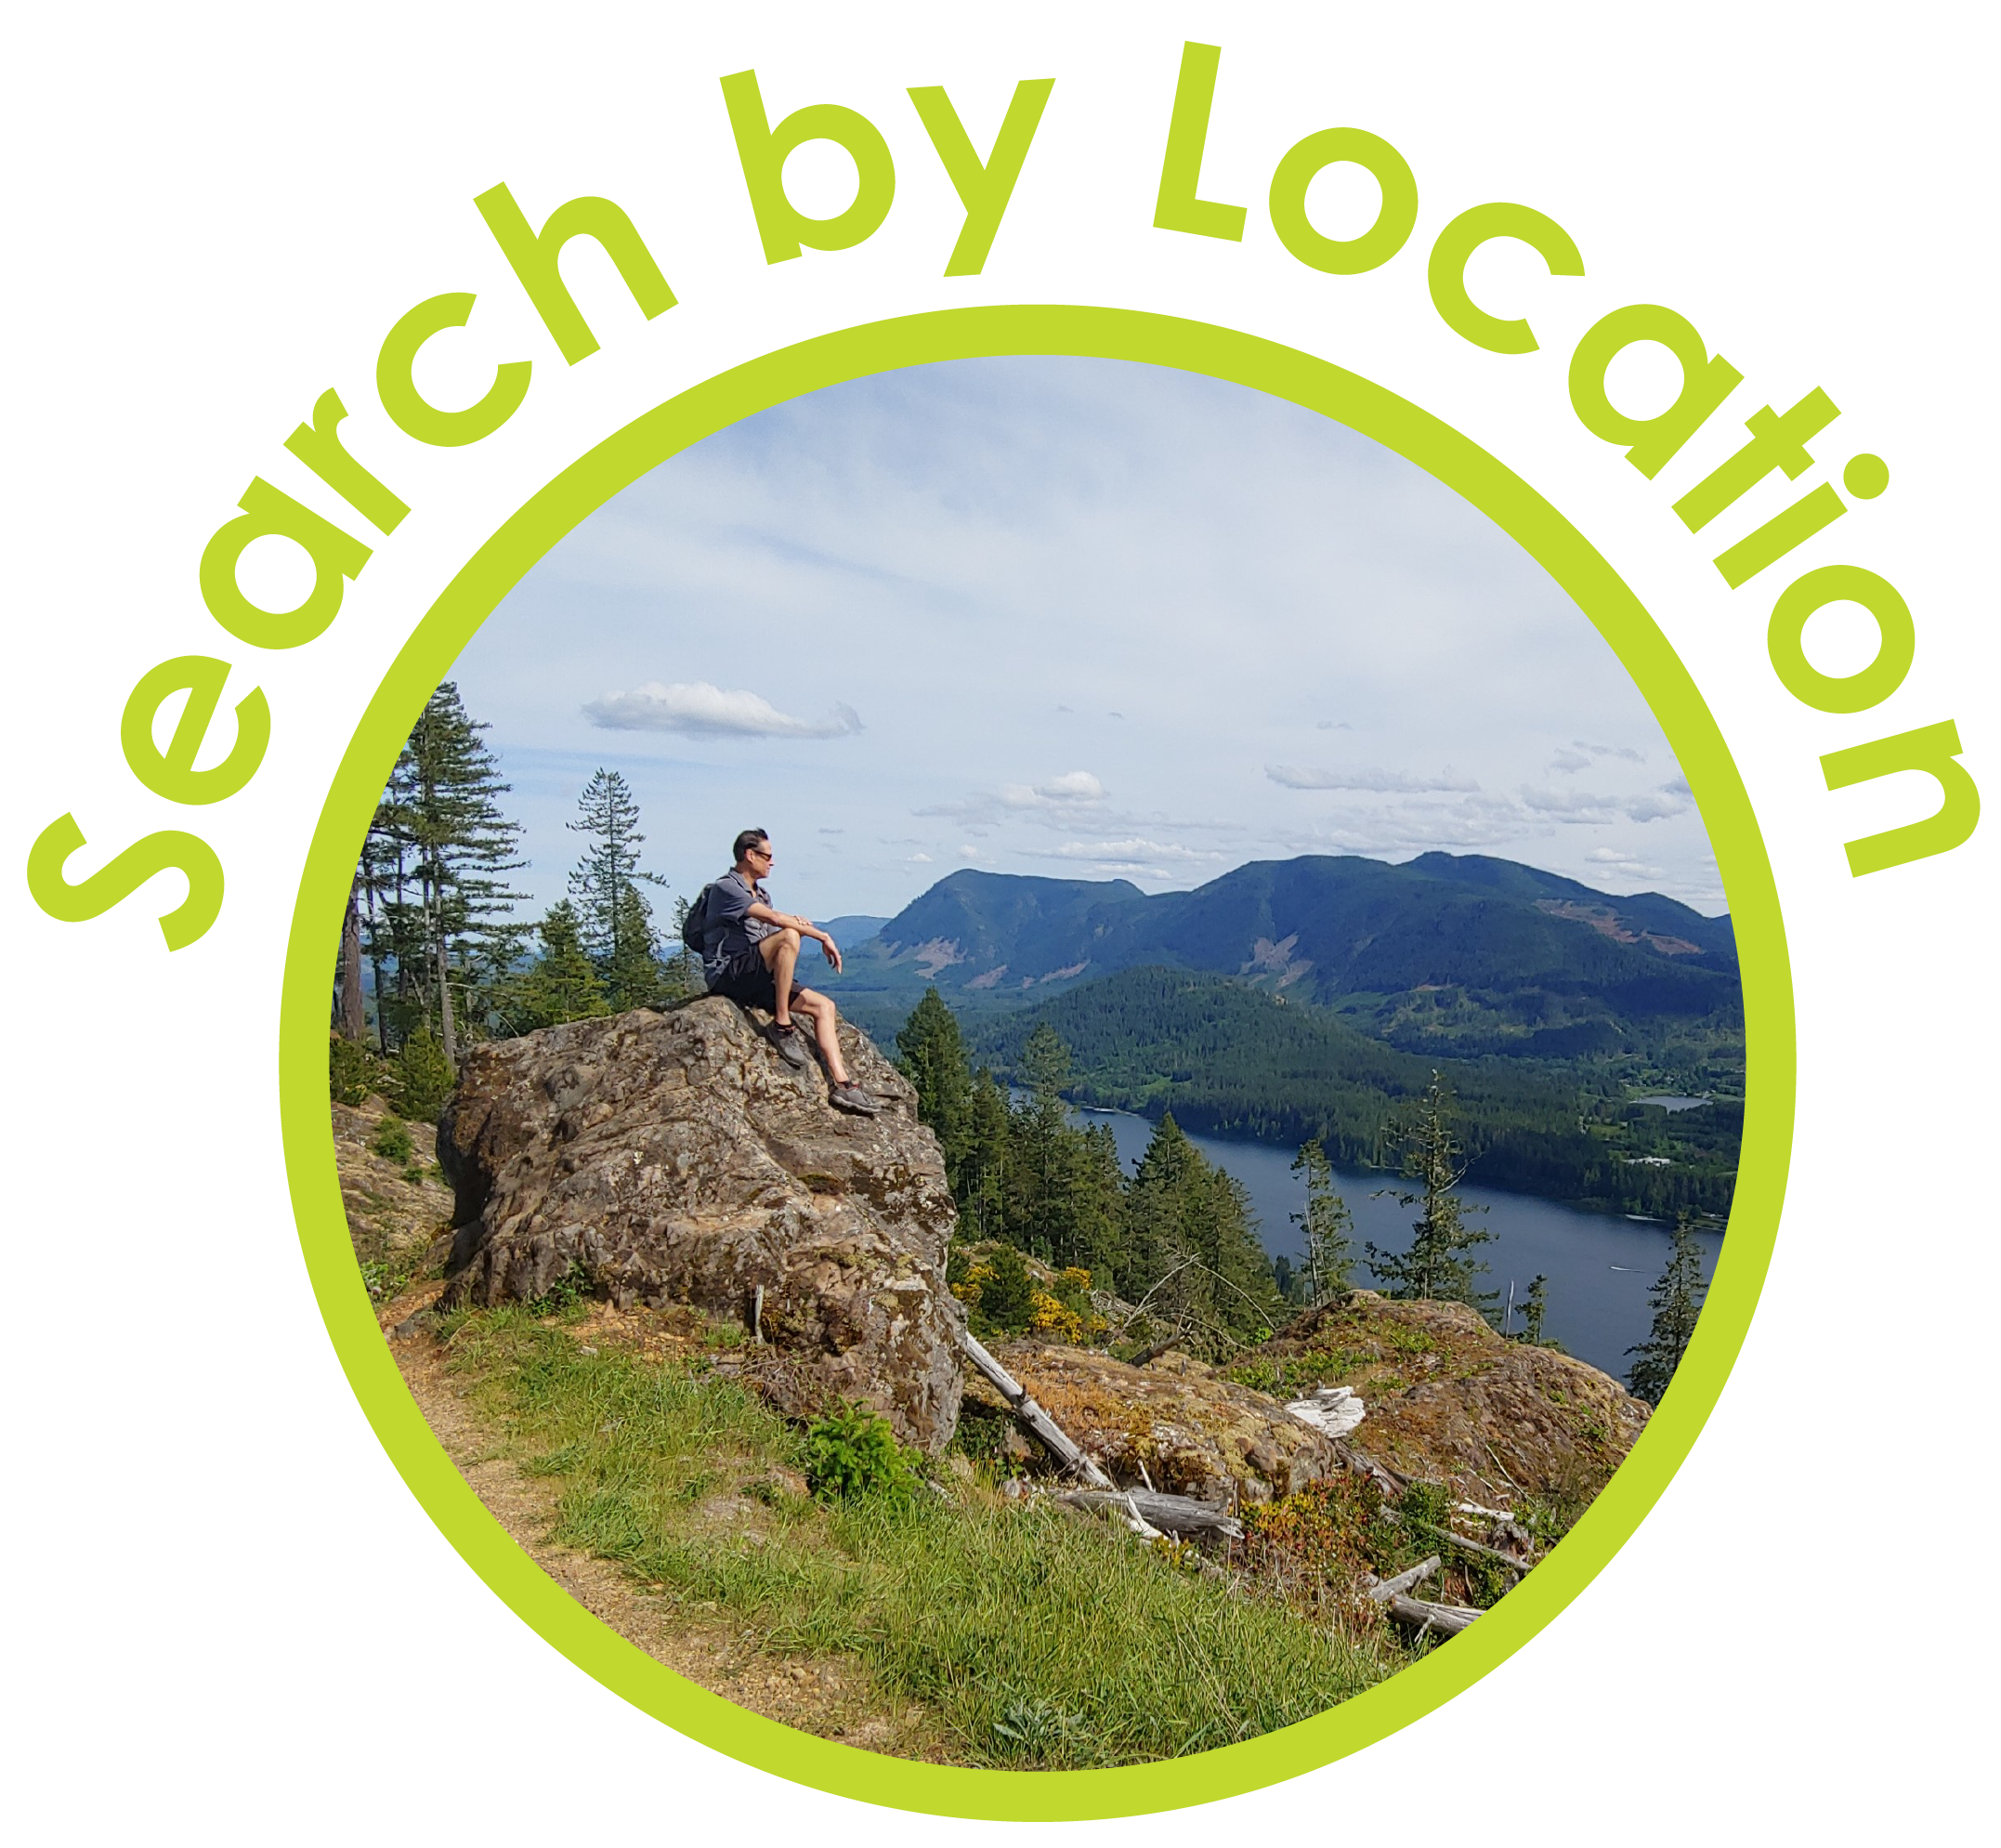 Clickable icon to search CVRD parks by location Opens in new window